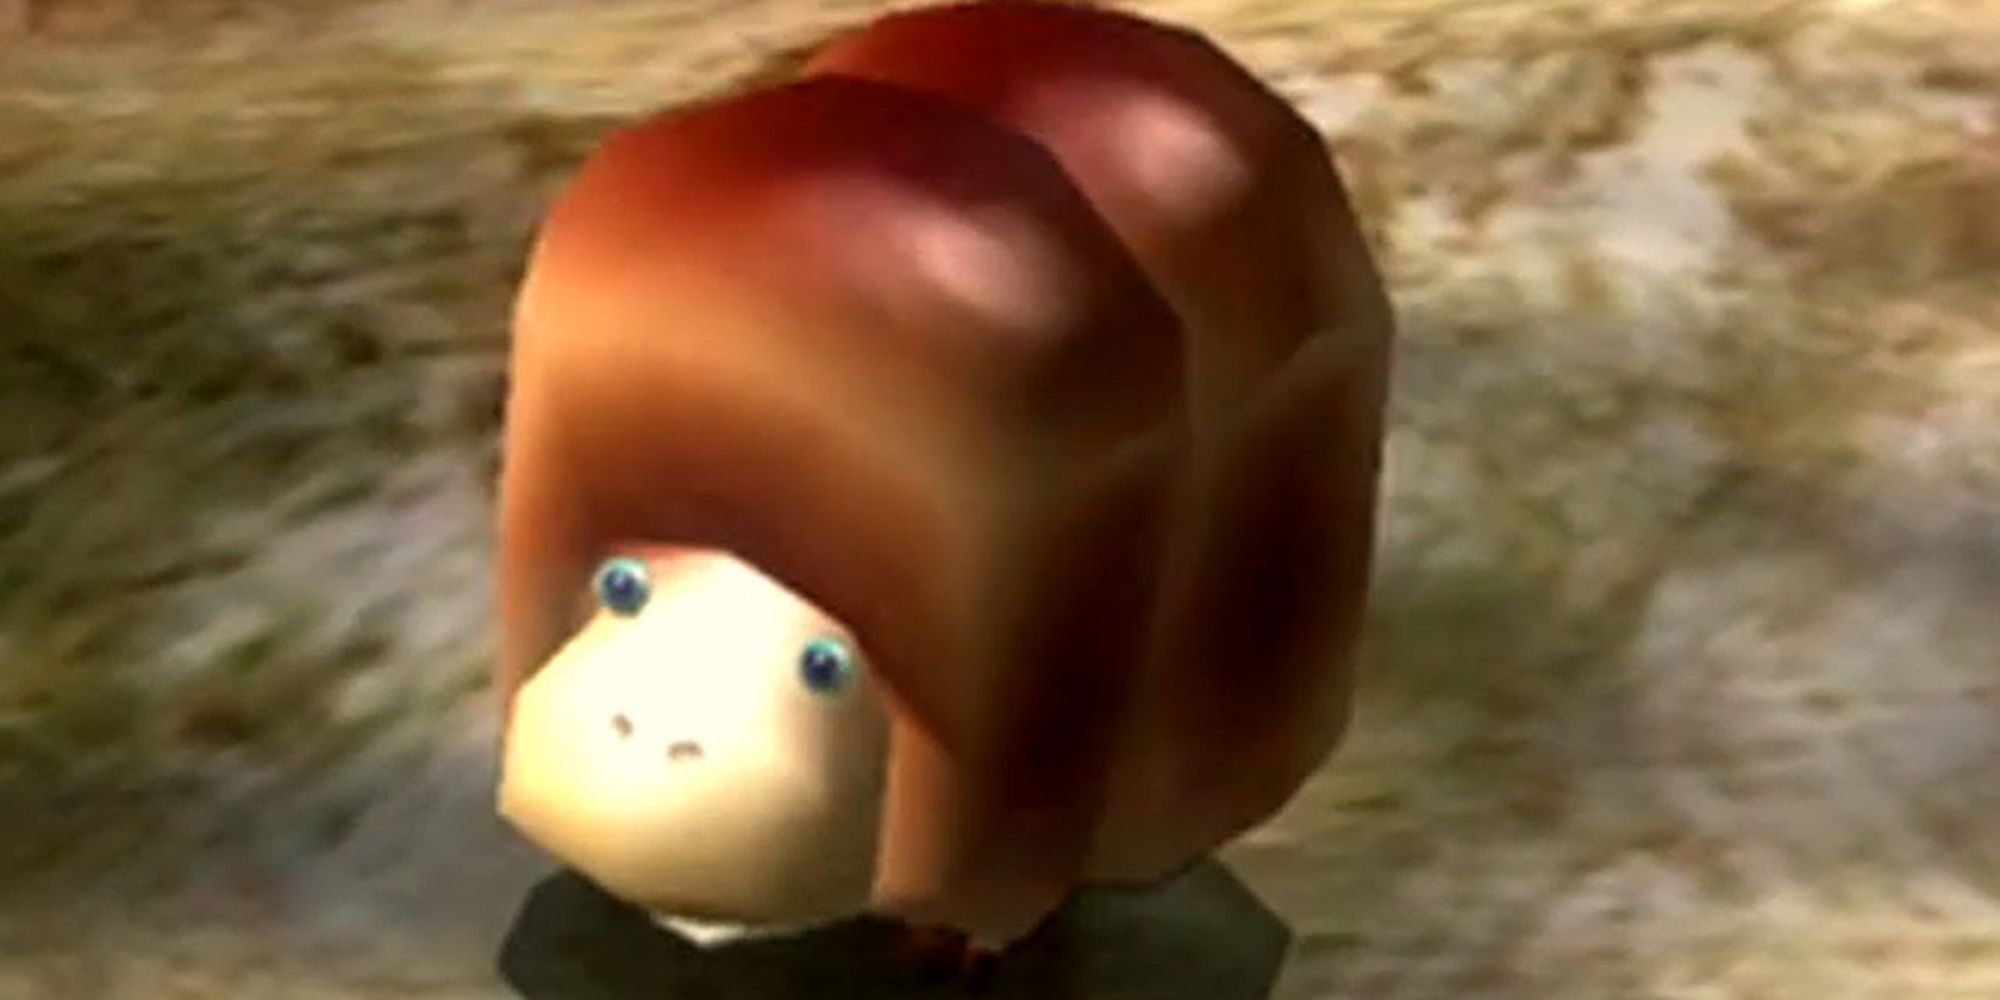 An image showing Breadbug from Pikmin, a square-shaped, bread-like enemy.